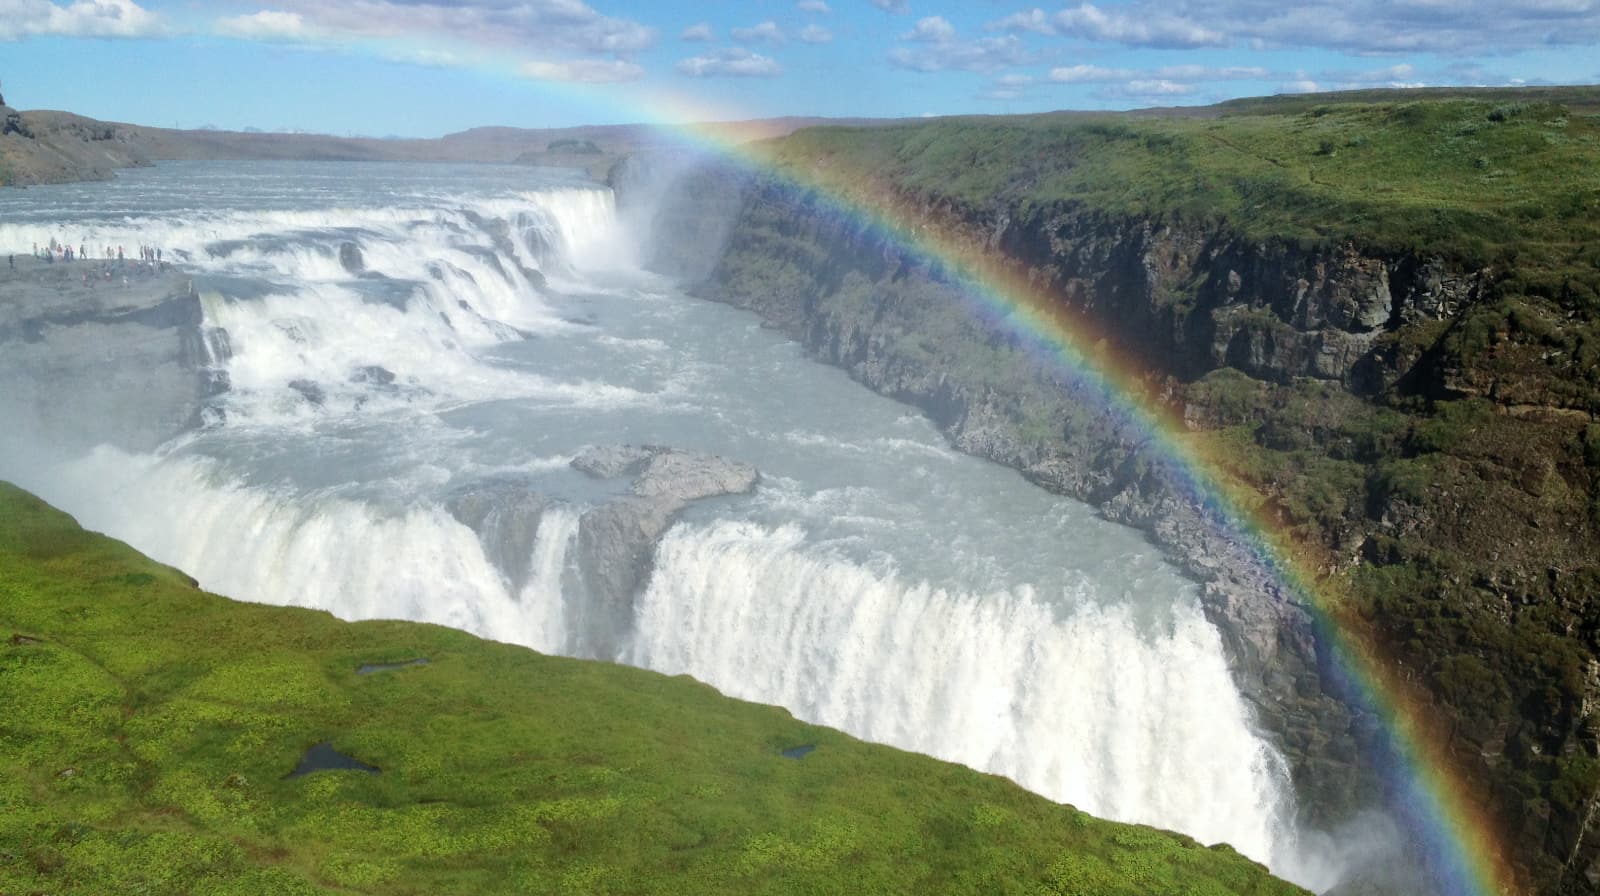 Large horizontally spread out waterfall with a rainbow